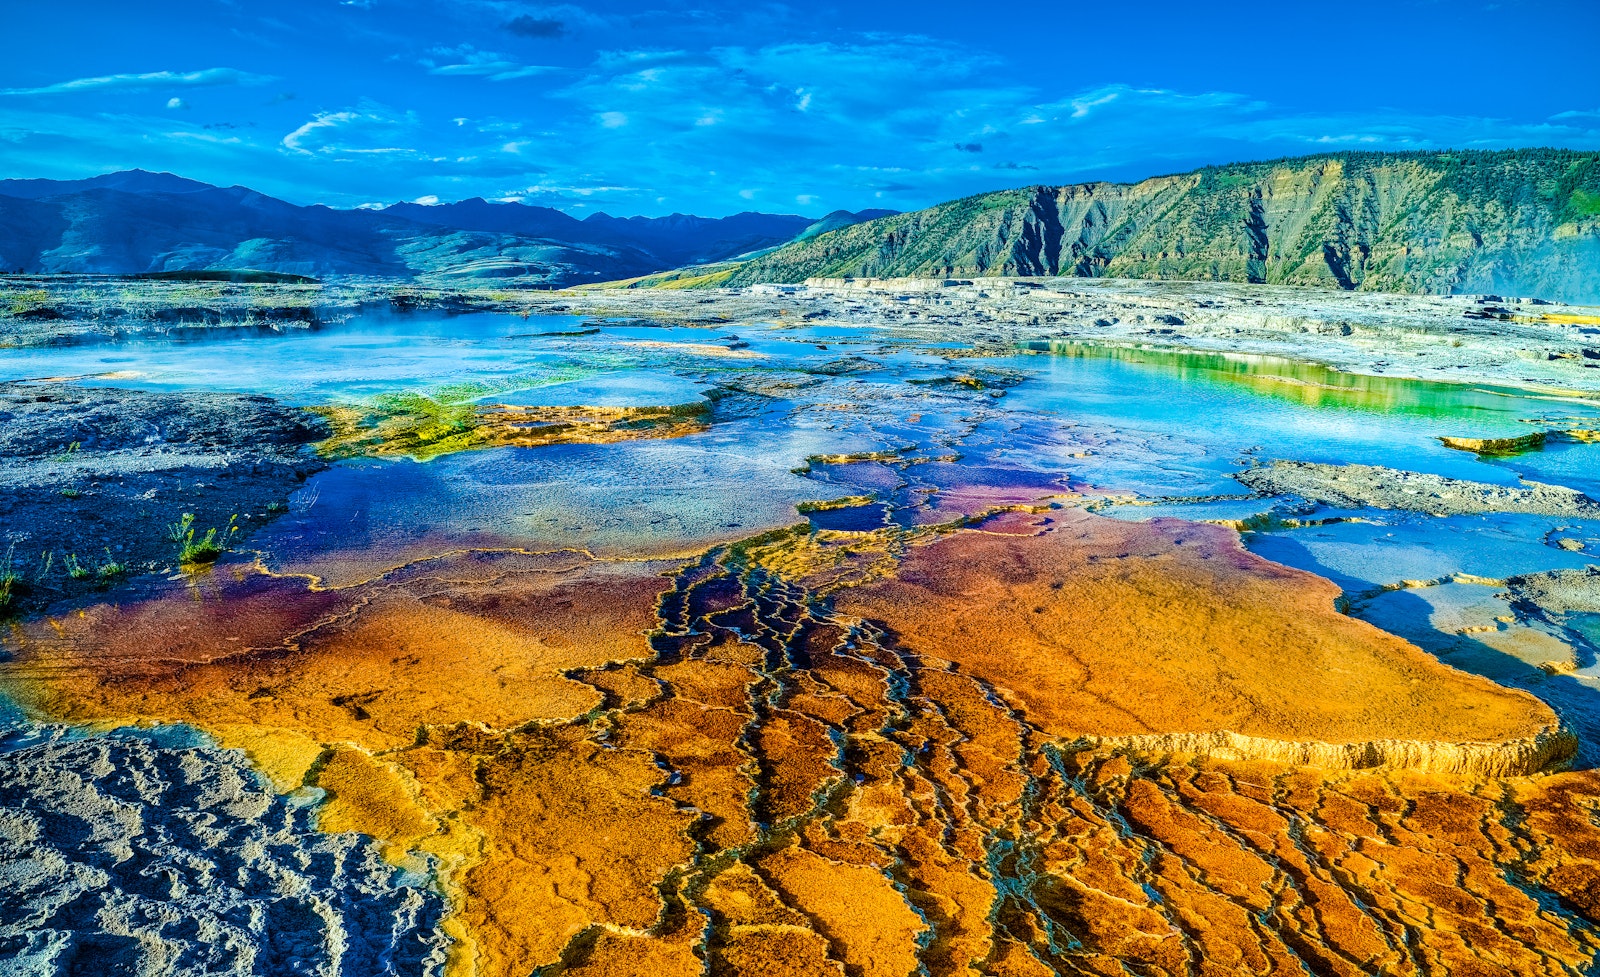 Technicolor tide pools reach into the distance, with pools of burnt yellow, lime green, and a vibrant teal and blue